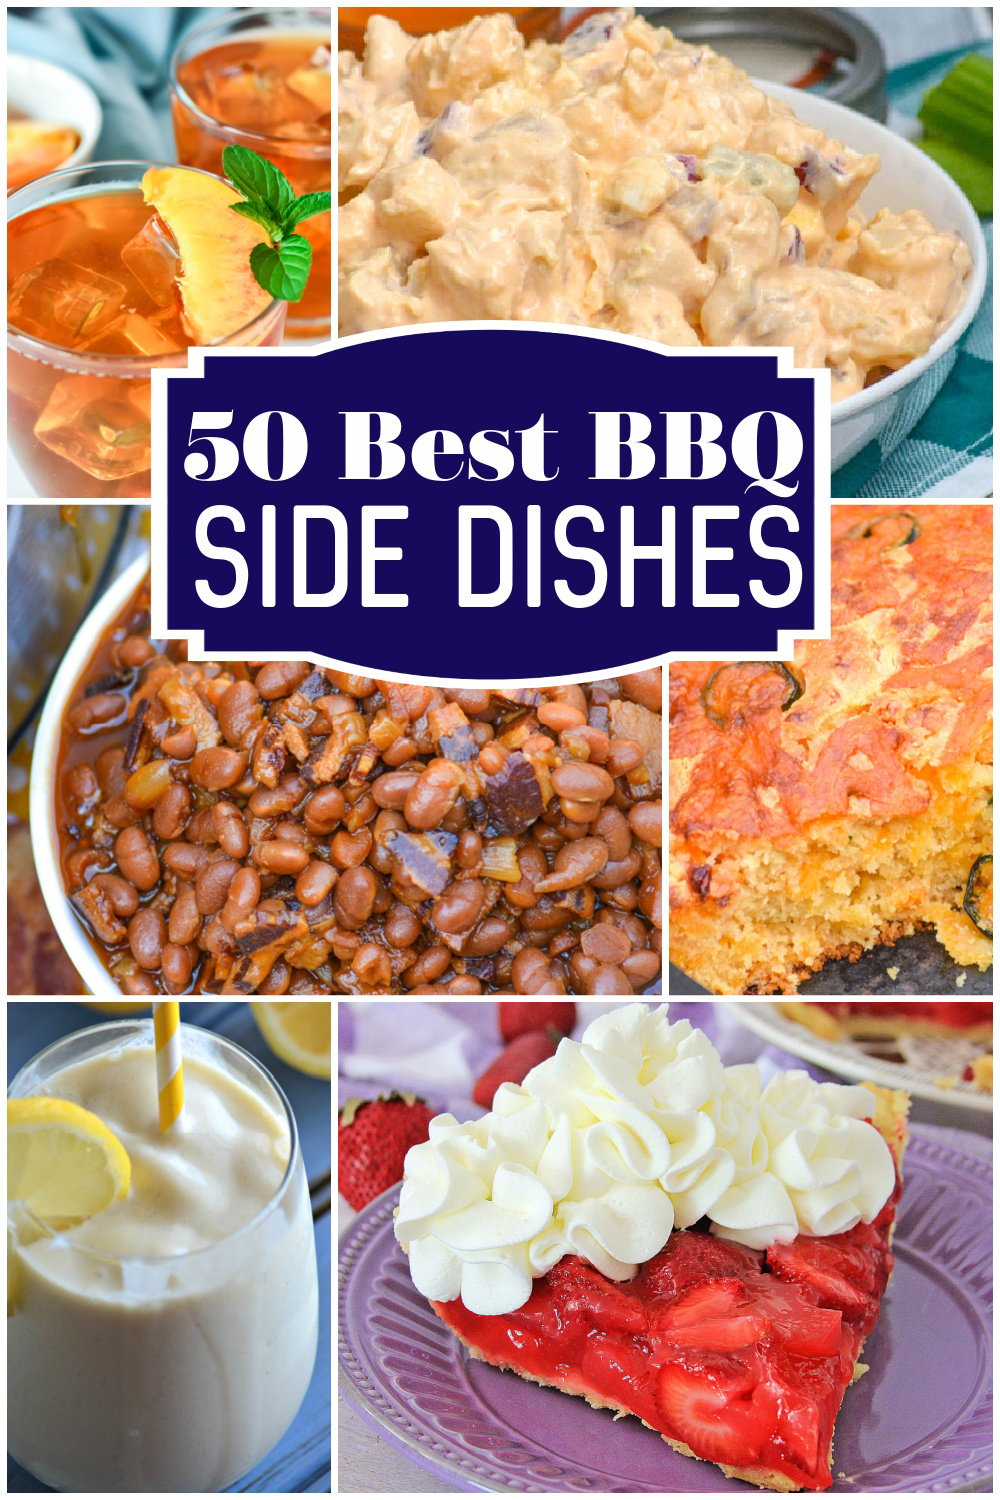 50 Best Barbecue Side Dishes